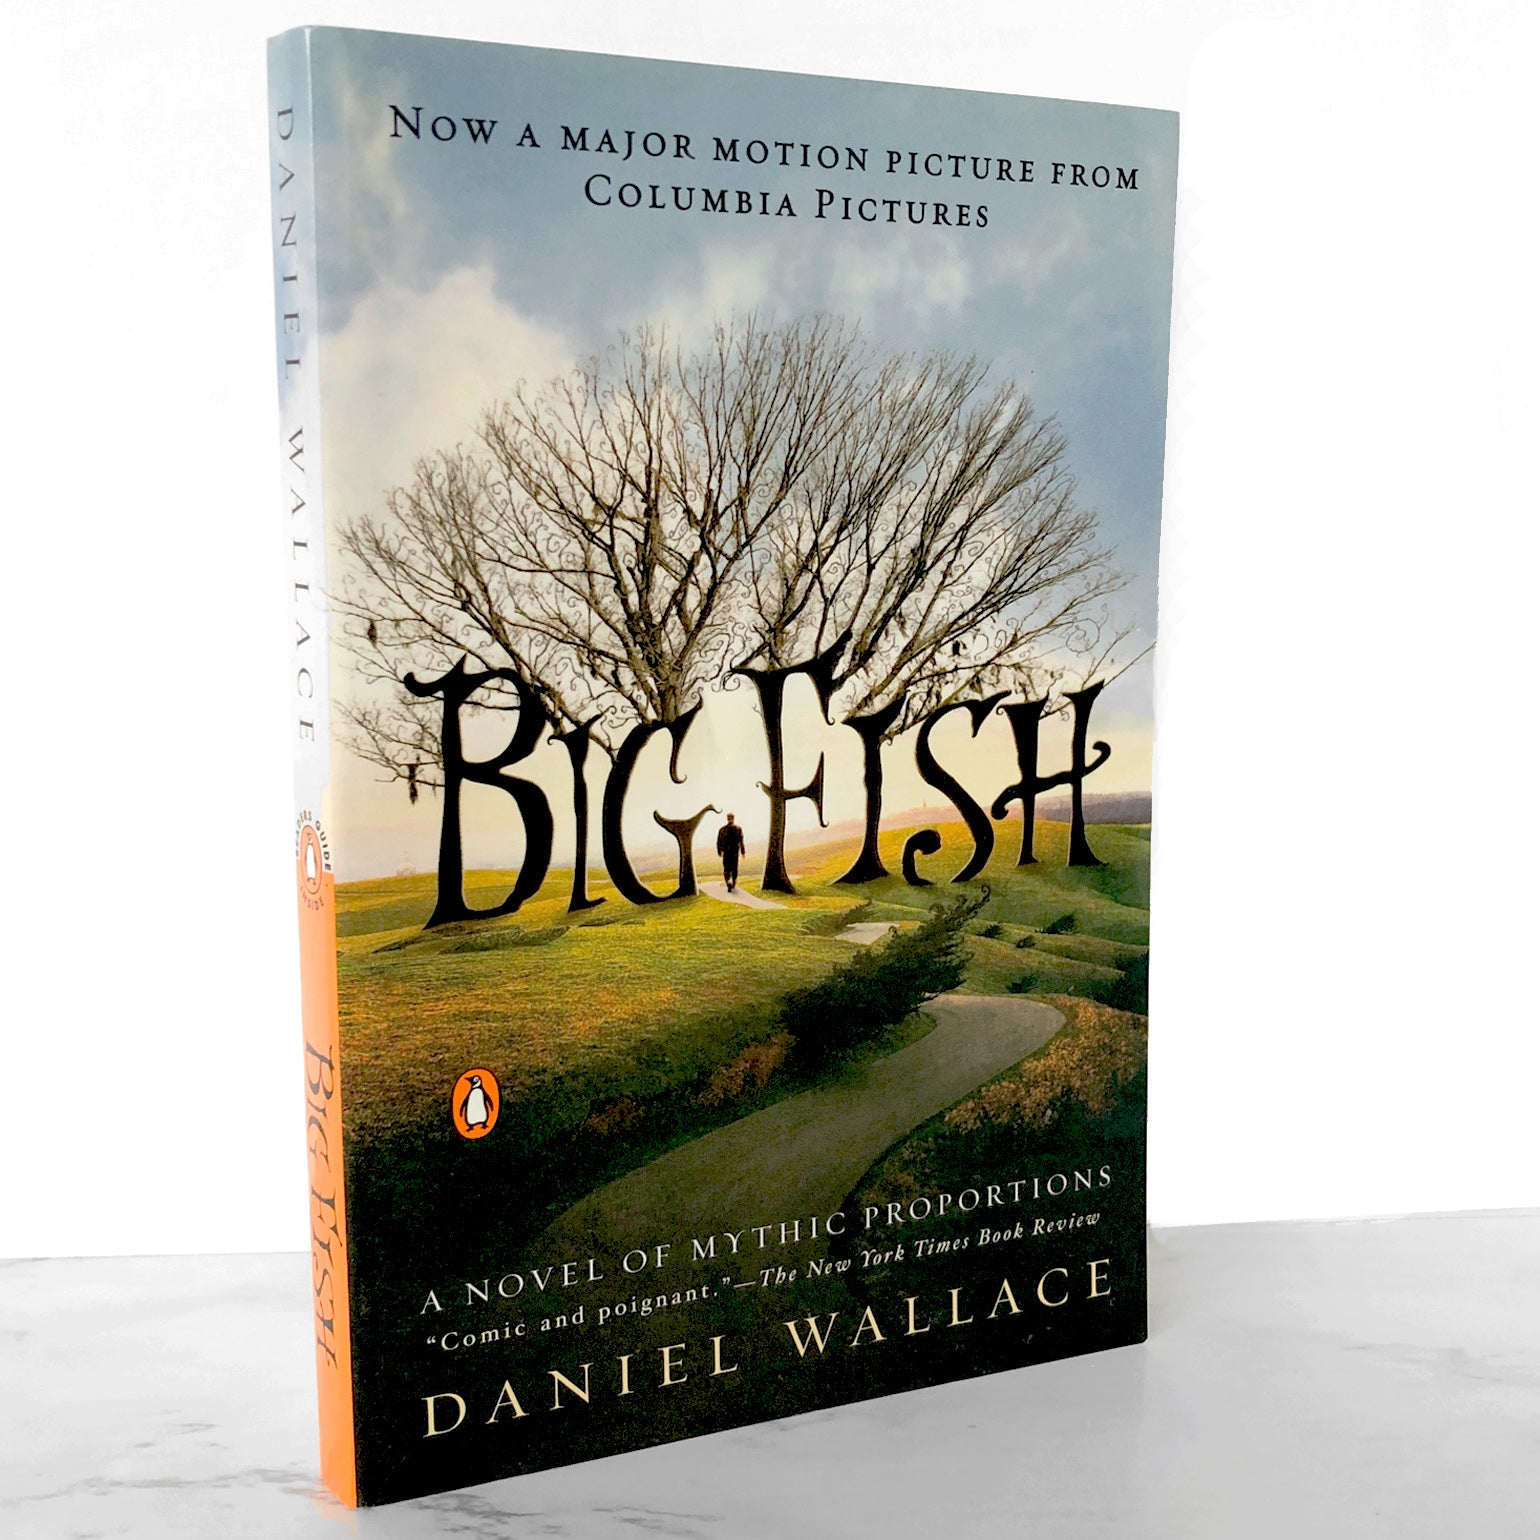 Big Fish by Daniel Wallace Review